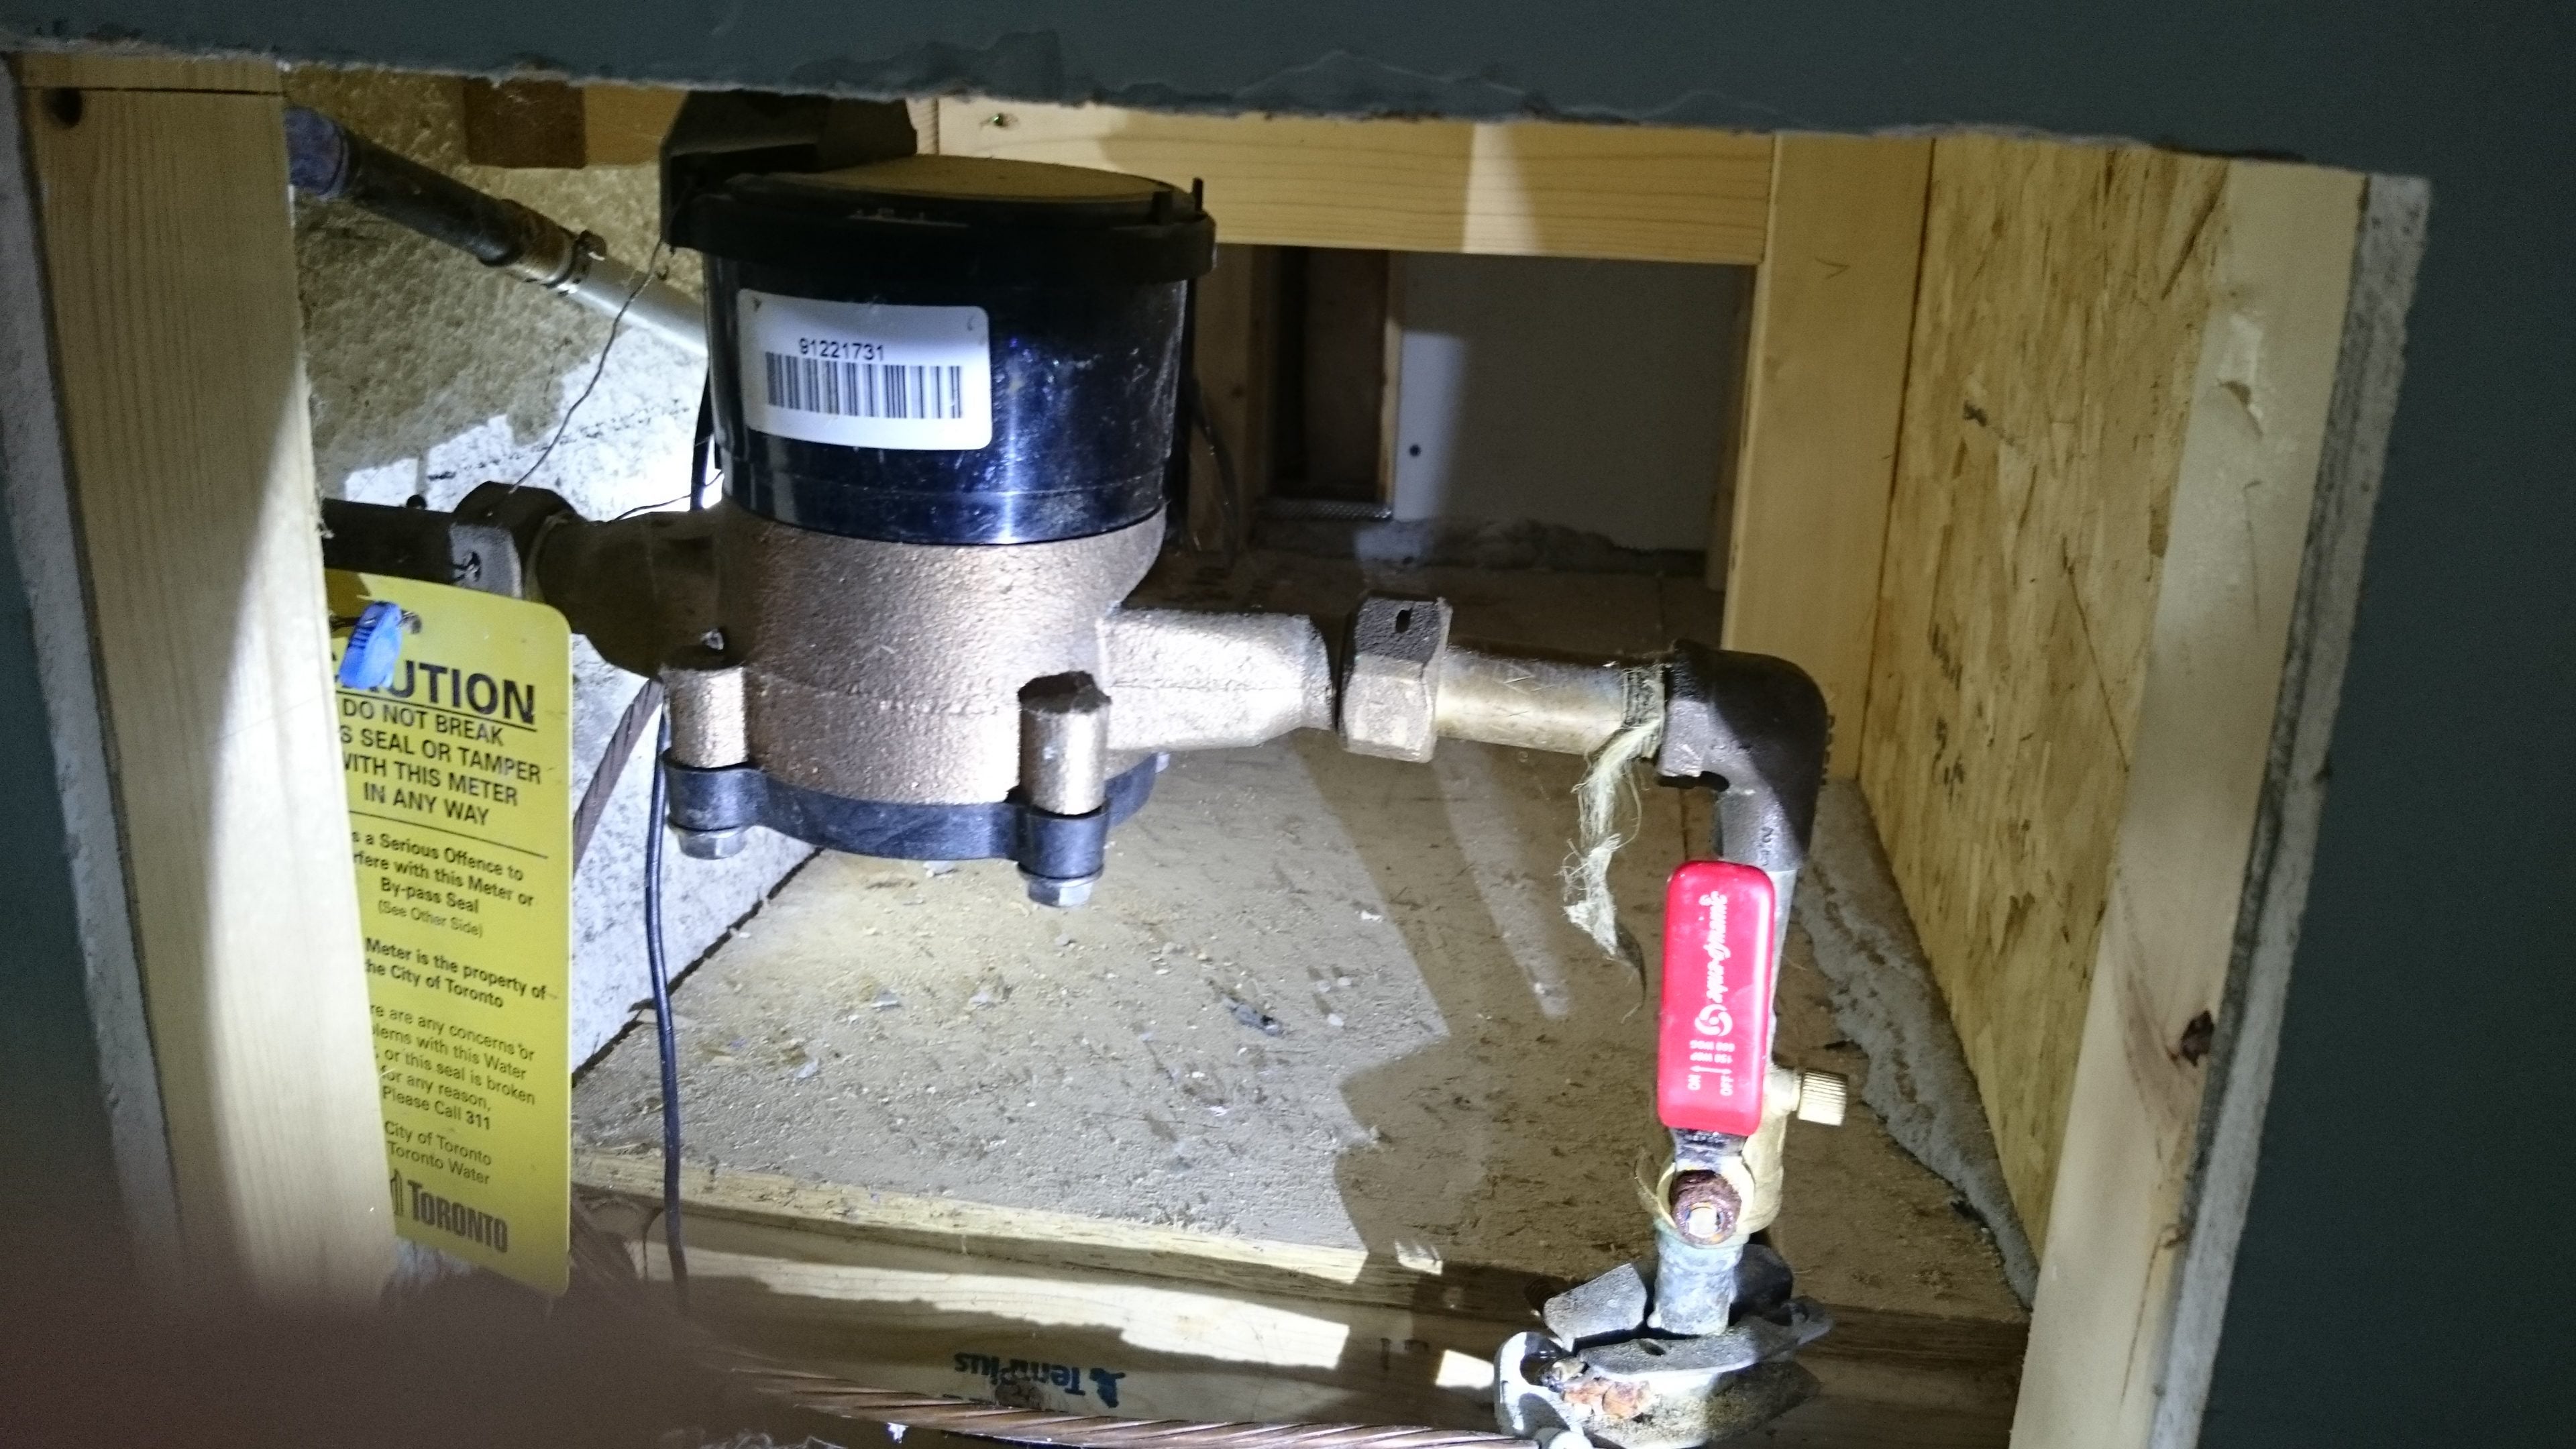 How to cap off old decomissioned fridge water line - RedFlagDeals.com Forums